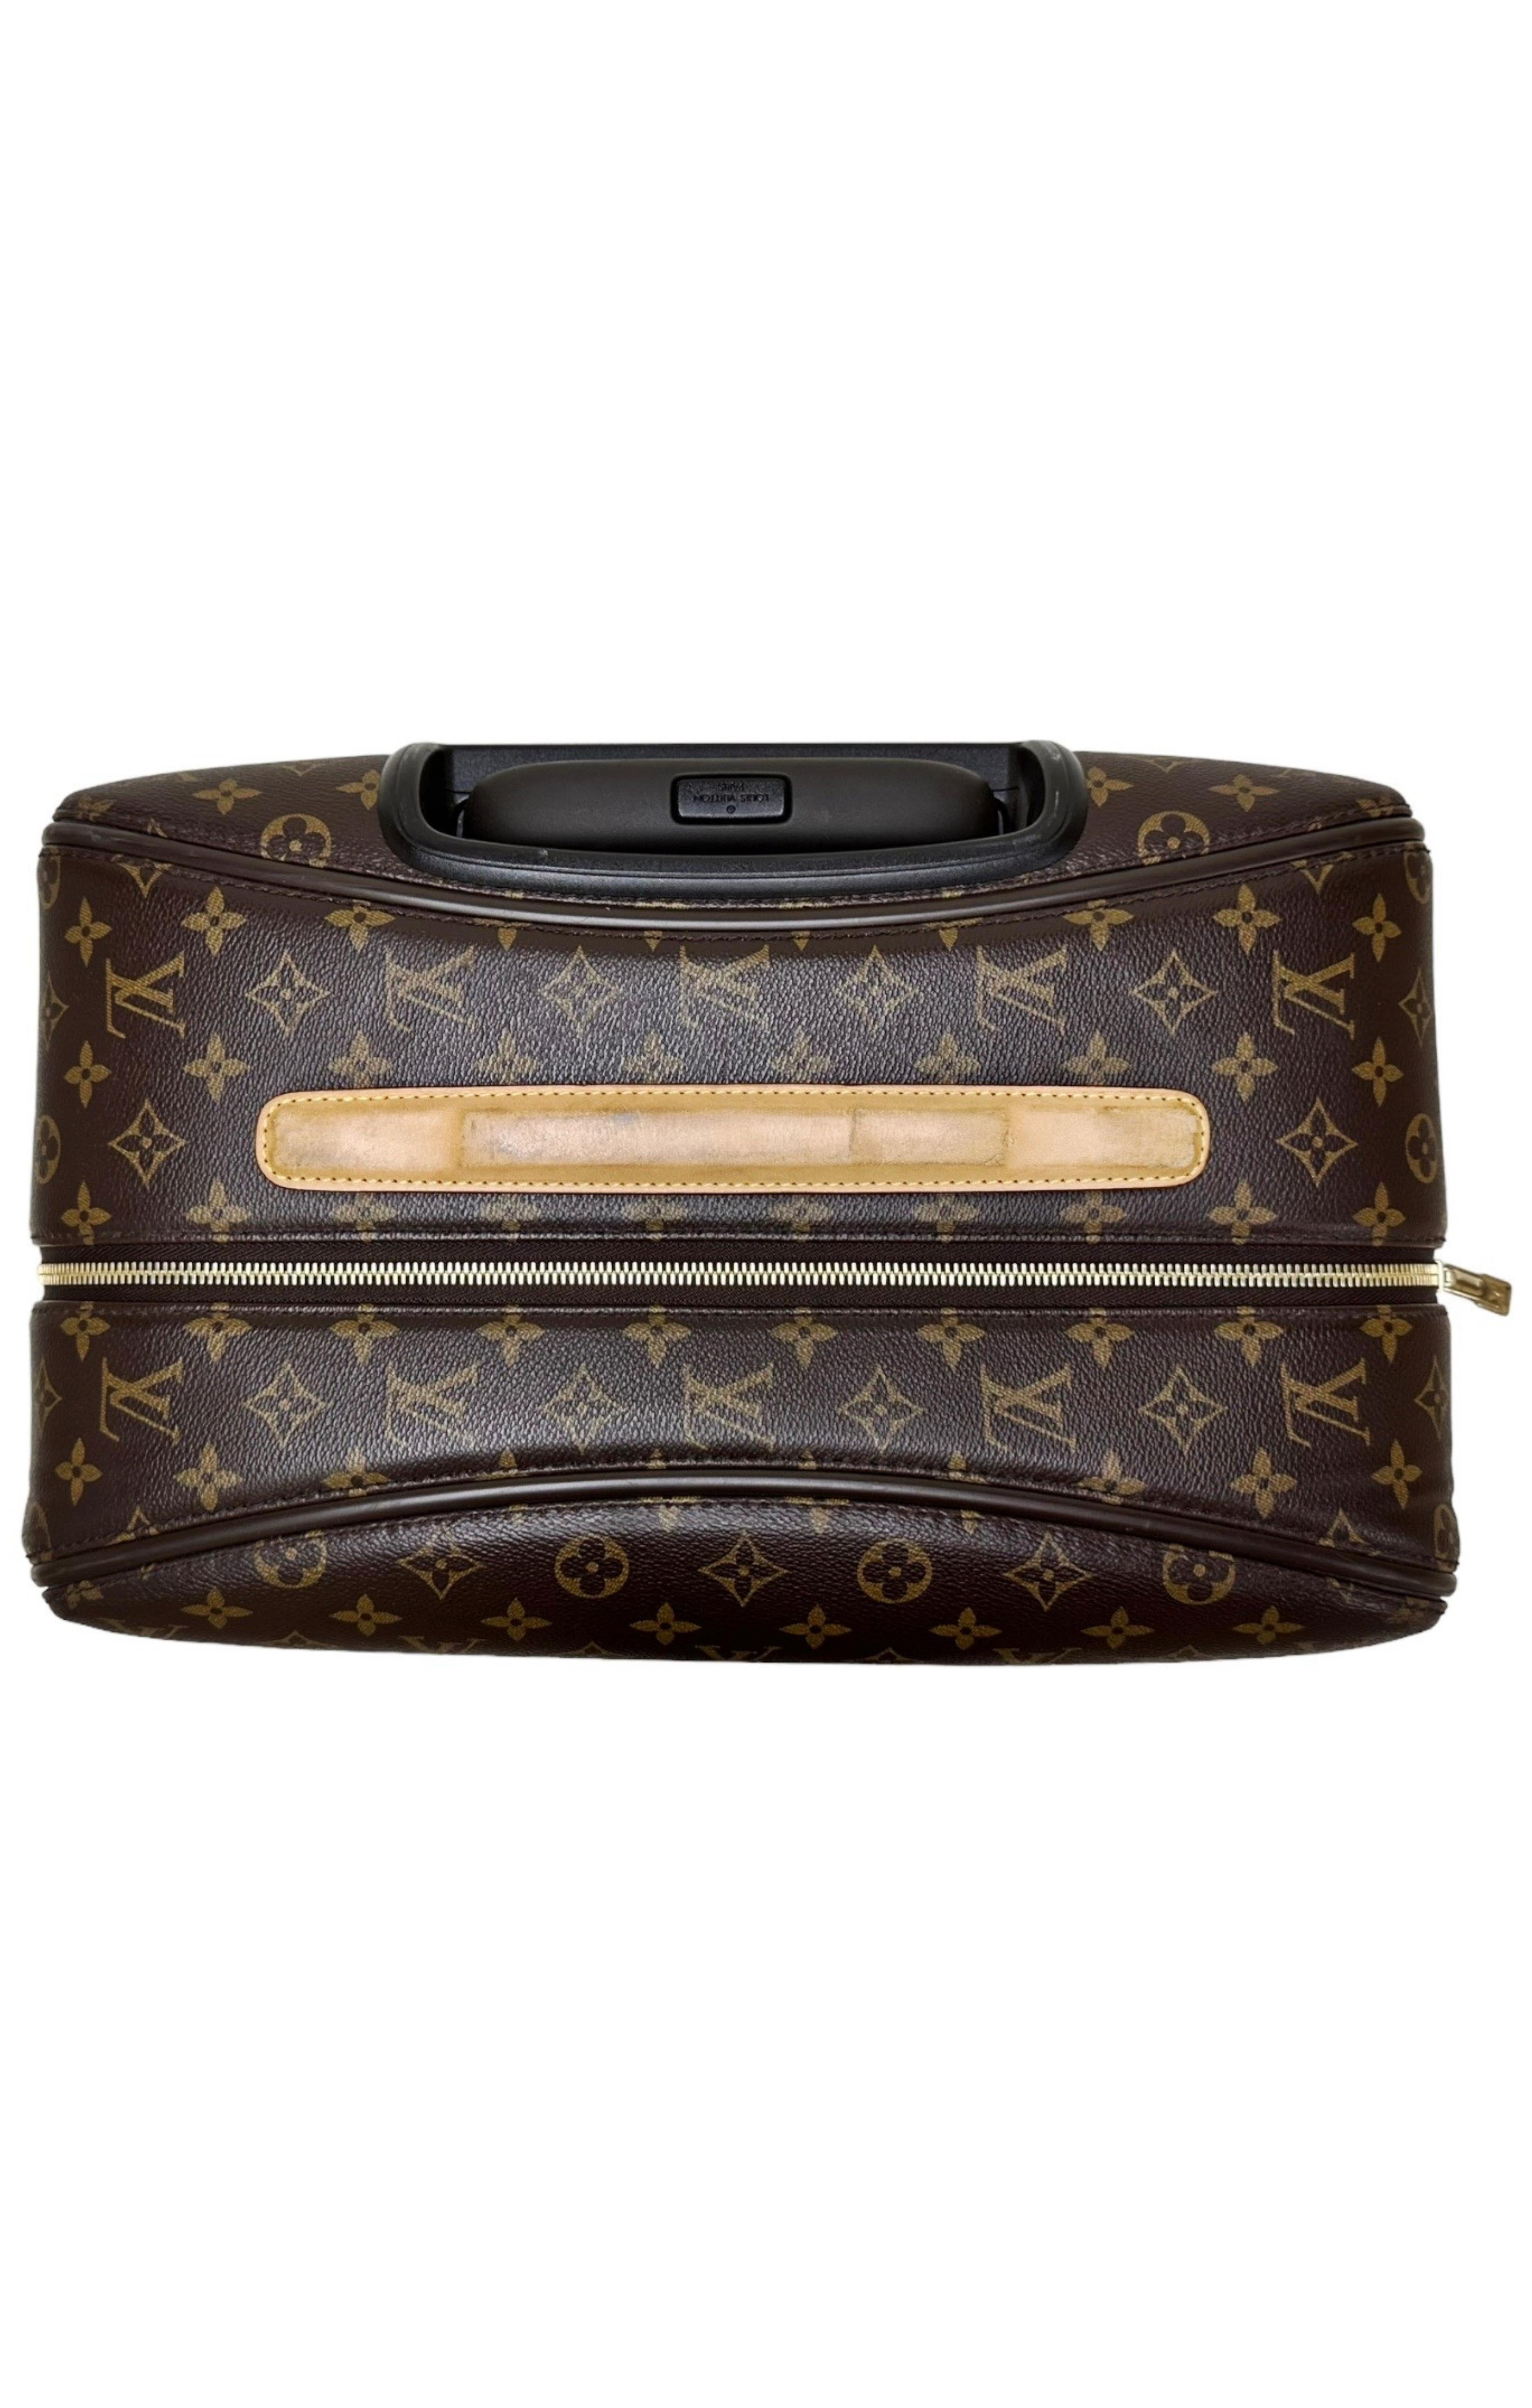 LOUIS VUITTON Size Carry On Brown Luggage - Brown / Carry On